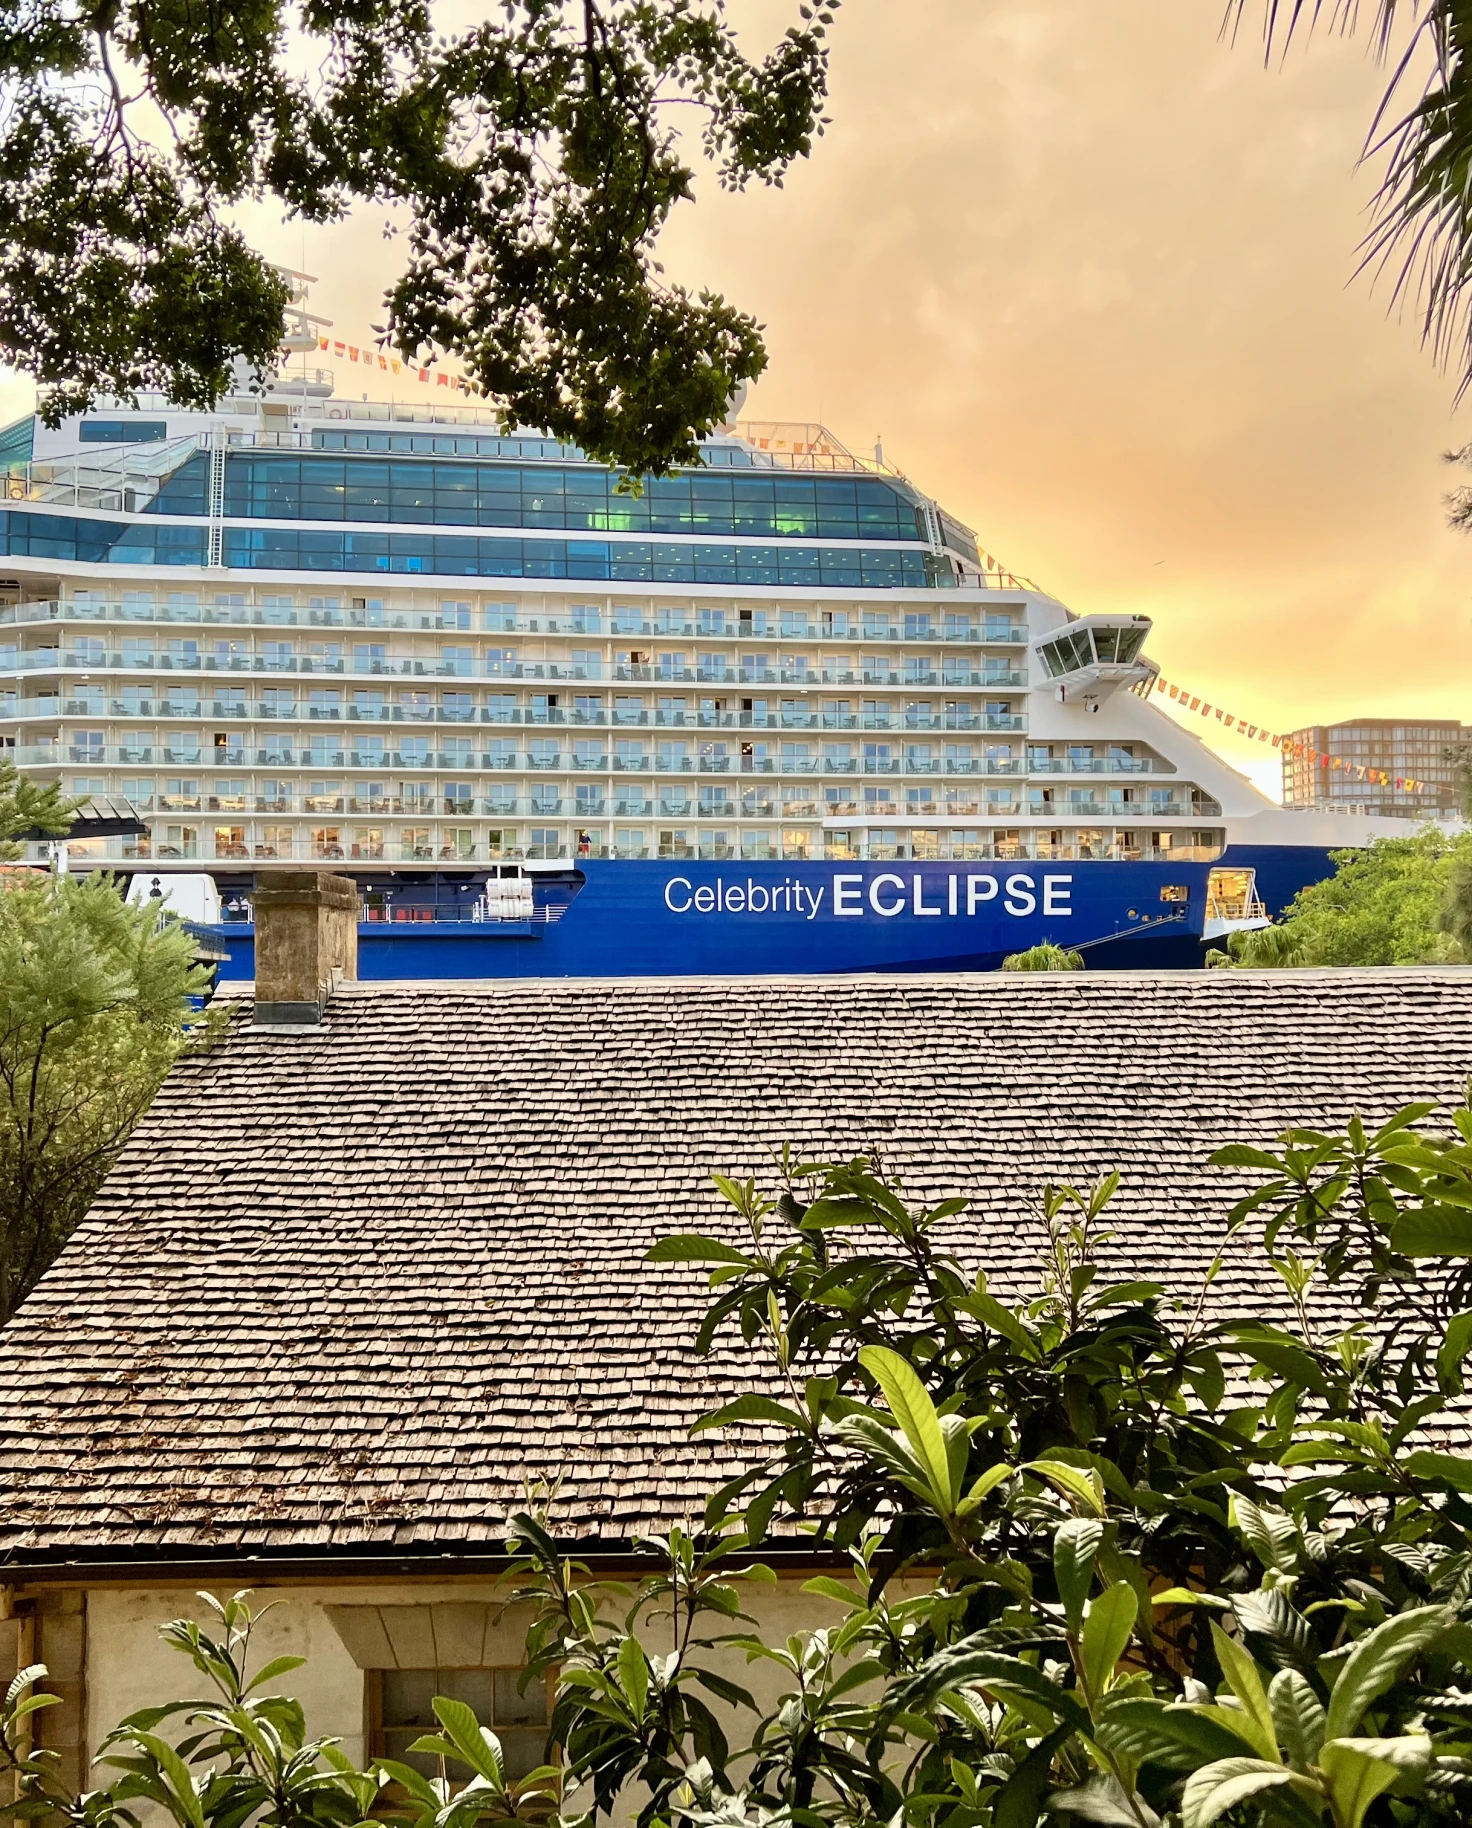 A huge building with ECLIPSE written on the banner